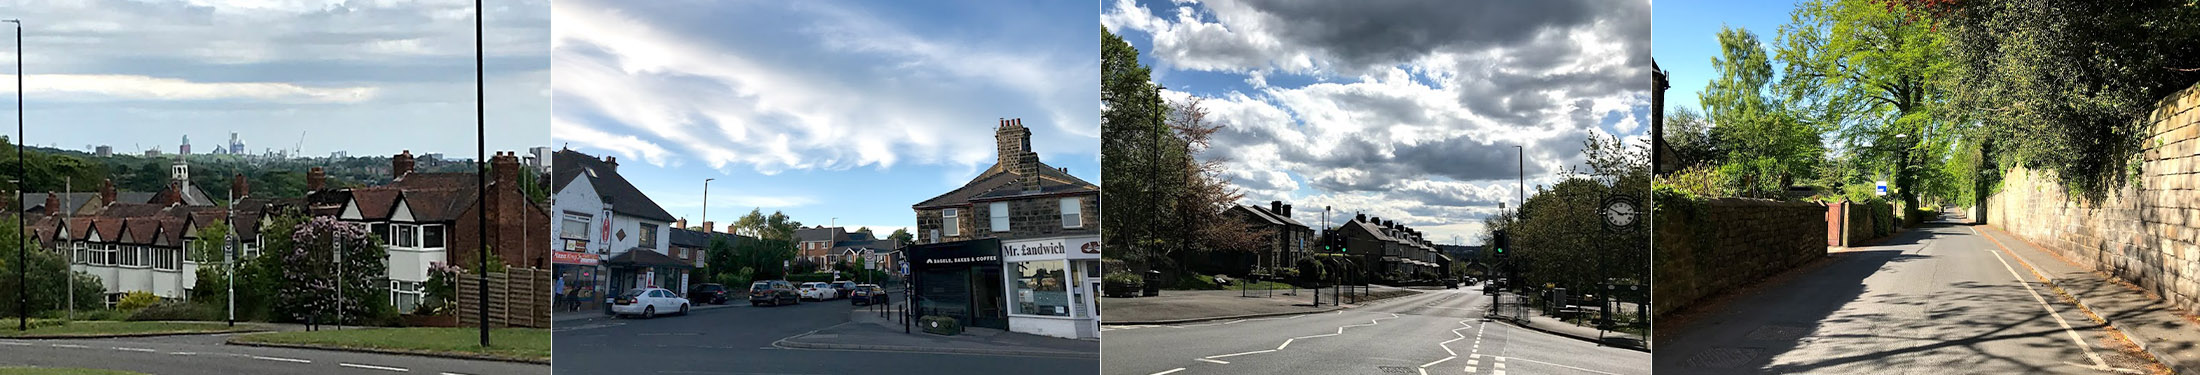 Montage of Horsforth High Street